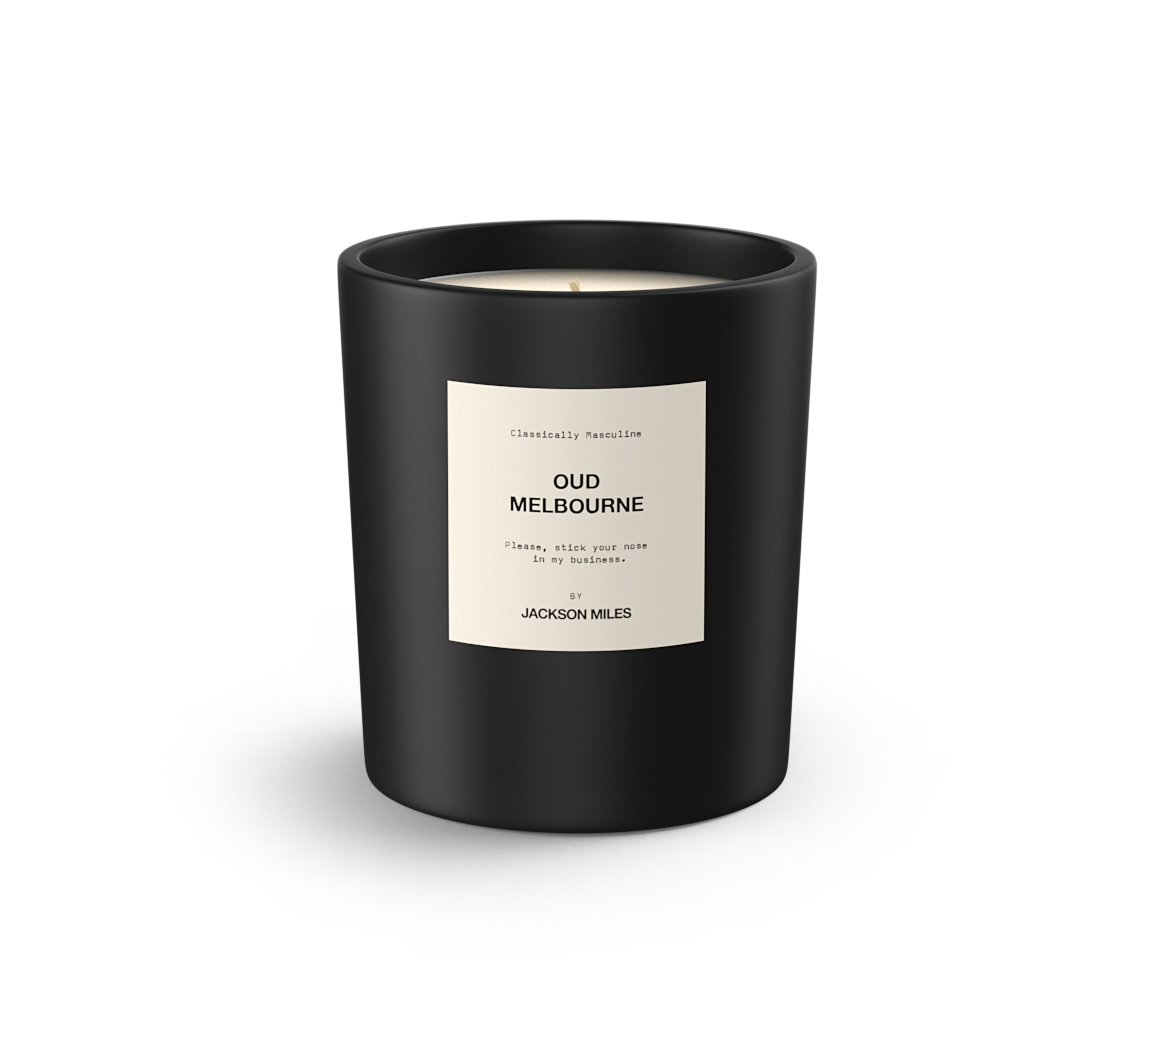 BEON.COM.AU You asked, we listened. One of our most popular scents, a warm and woody masculine scent with notes of Bergamot, Sandalwood and Lavender.  Housed in a beautiful black vessel with a black lid, our candles are designed to fill small to medium-sized spaces with rustic, classy scents.  Approx 60 hour... Jackson Miles at BEON.COM.AU